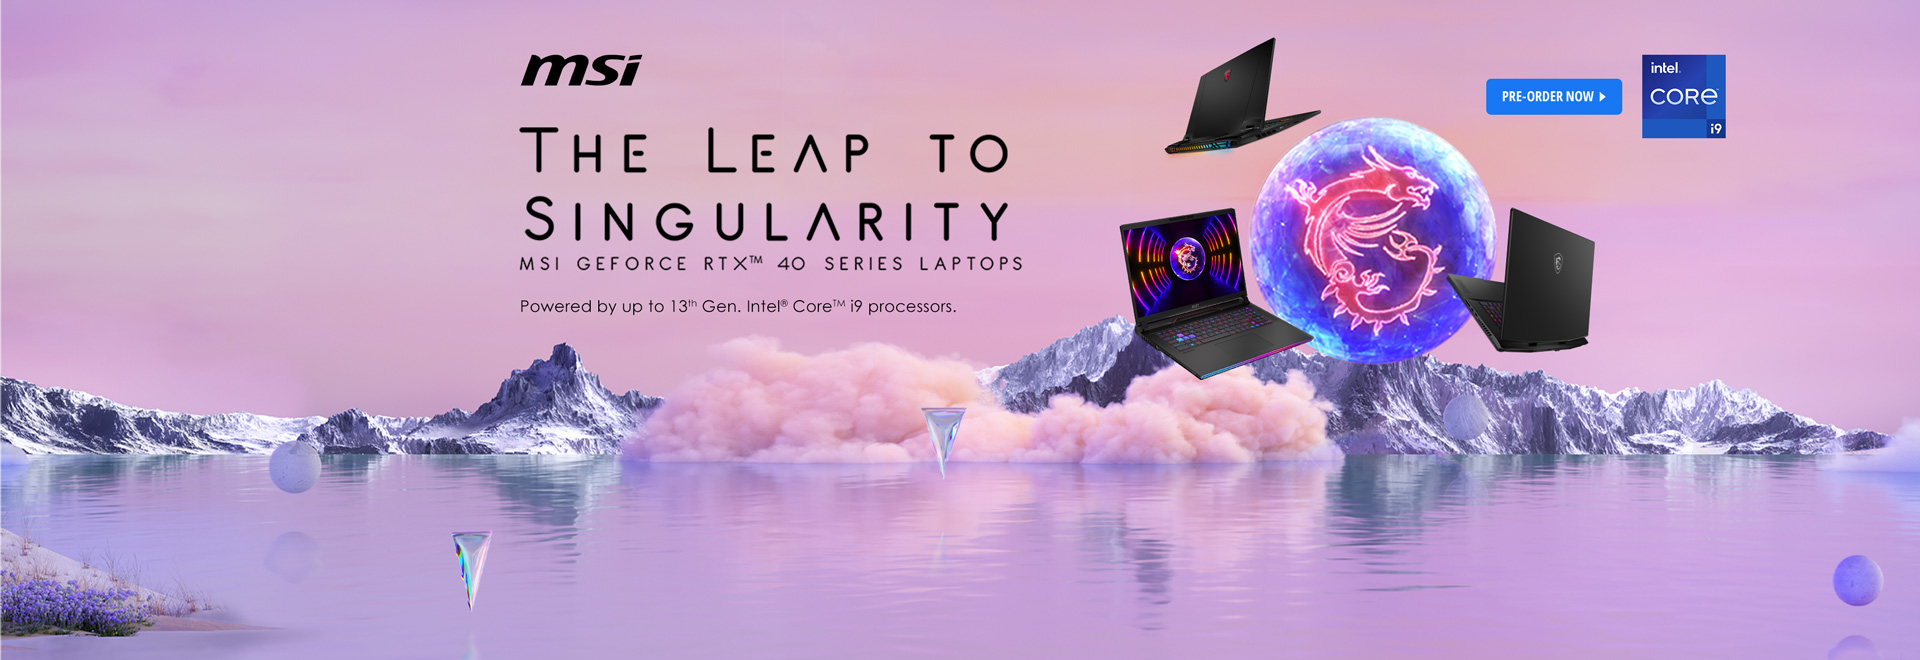 The Leap to Singularity